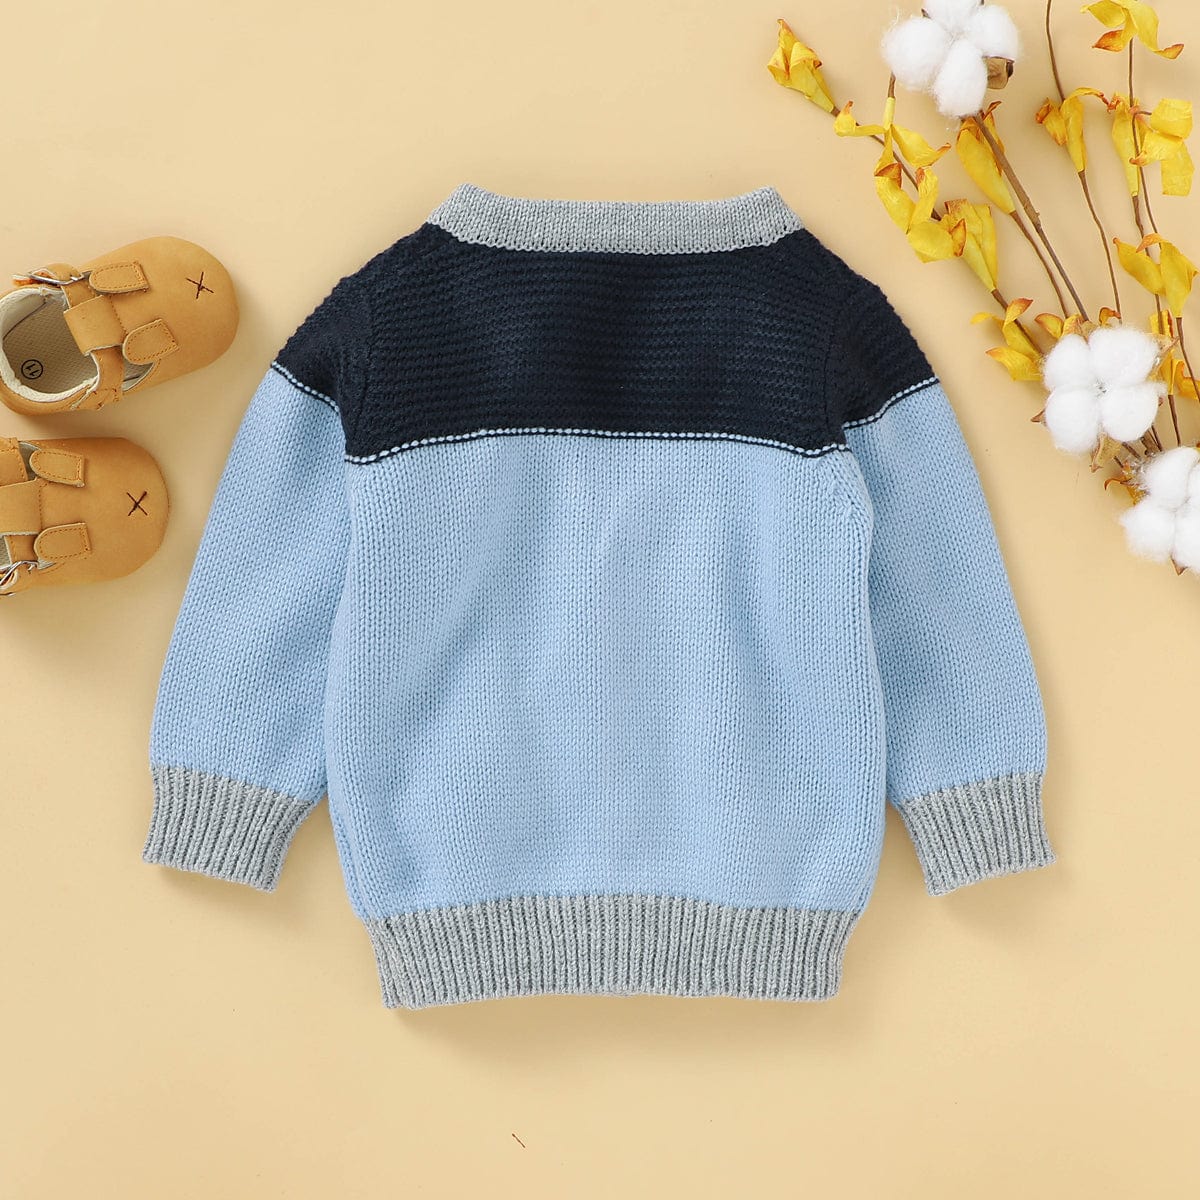 Newborn, Baby and Toddler 100% Cotton Long Sleeve Sweater Knit One